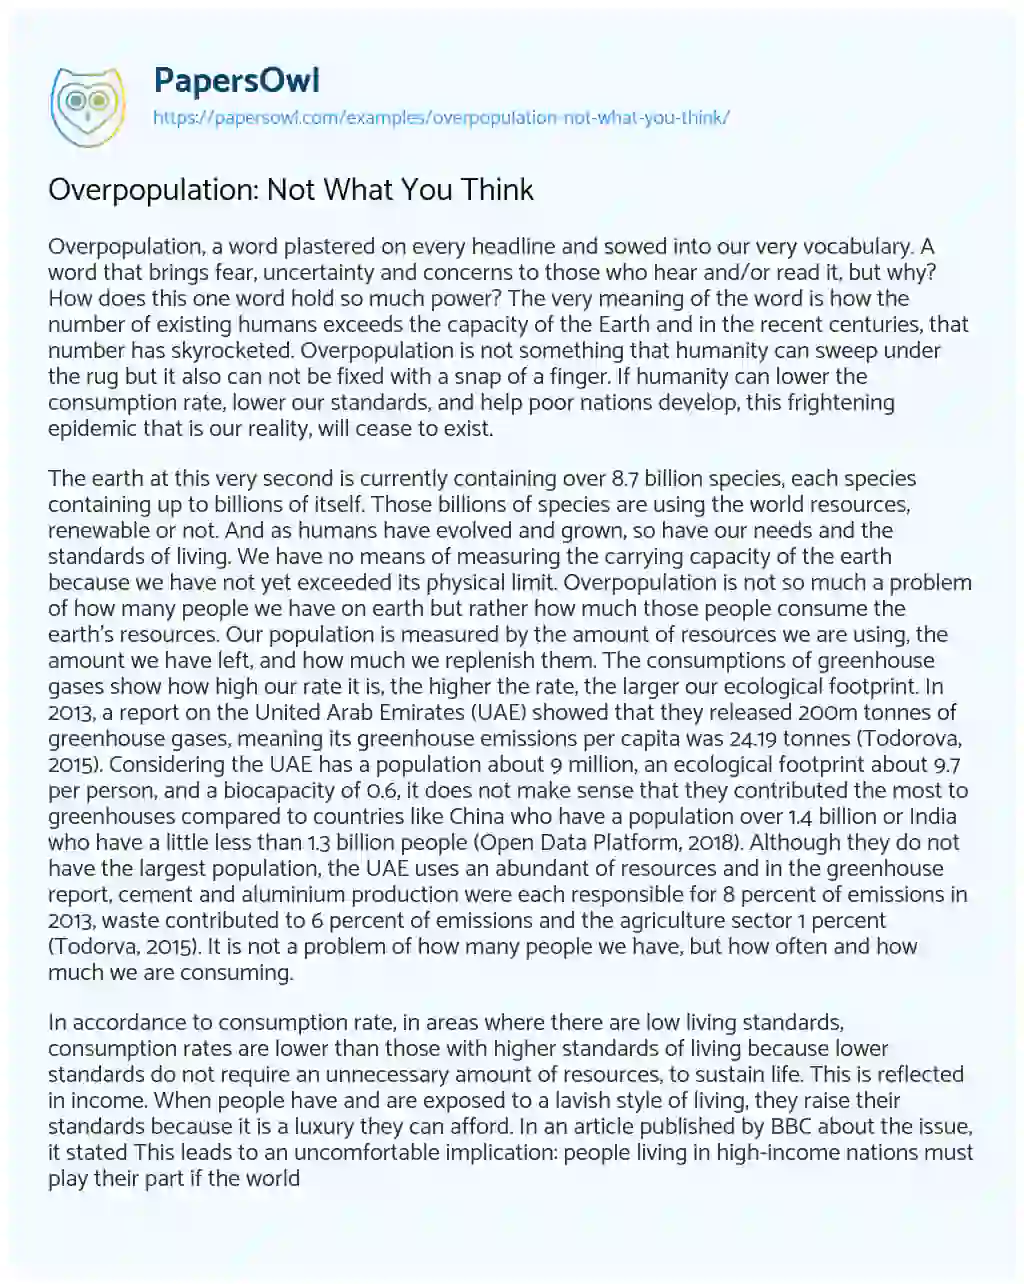 Essay on Overpopulation: not what you Think